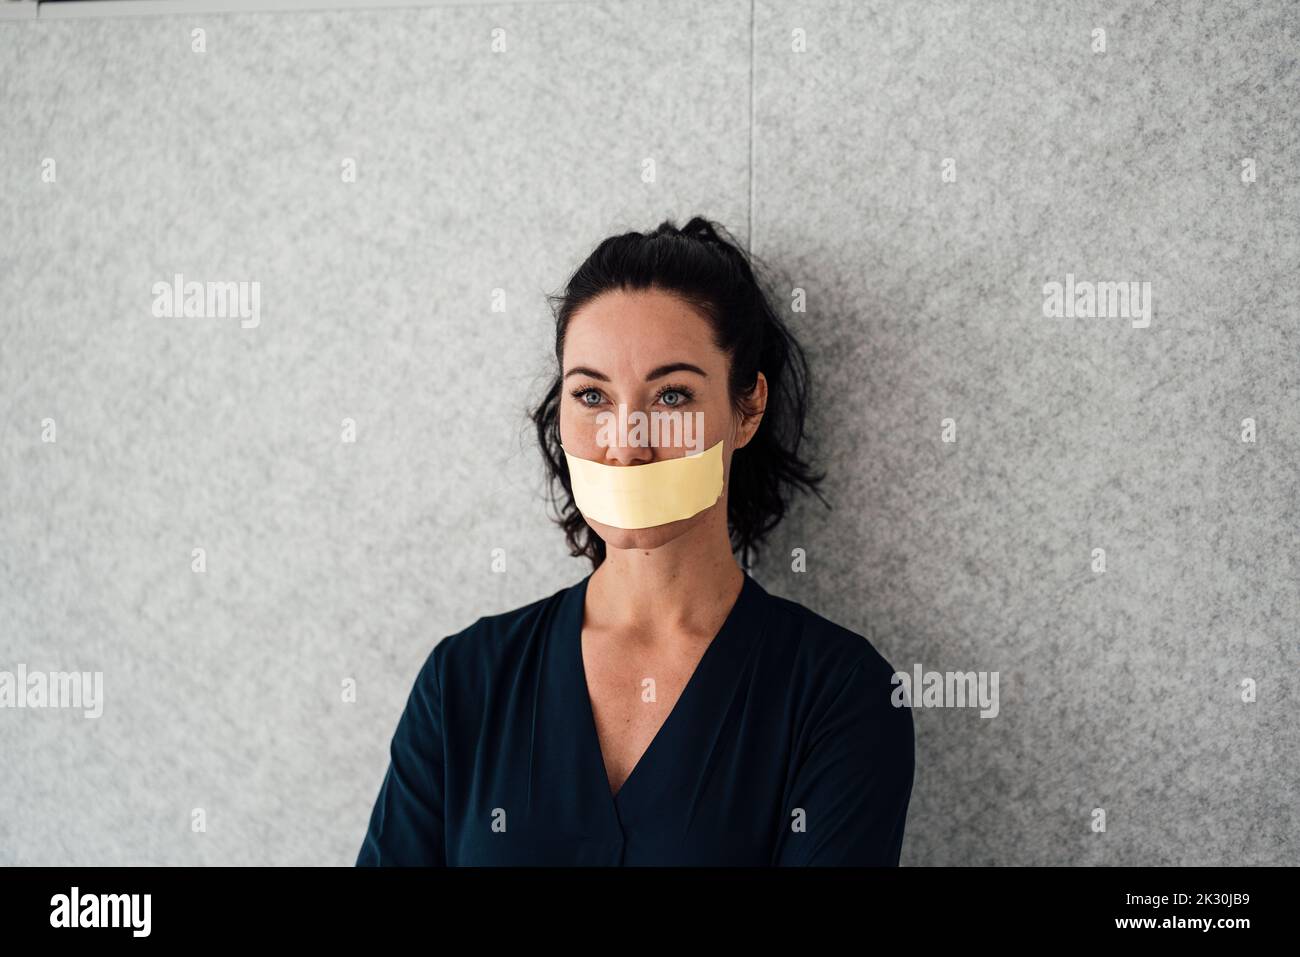 Woman with tape over mouth standing in front of gray wall Stock Photo